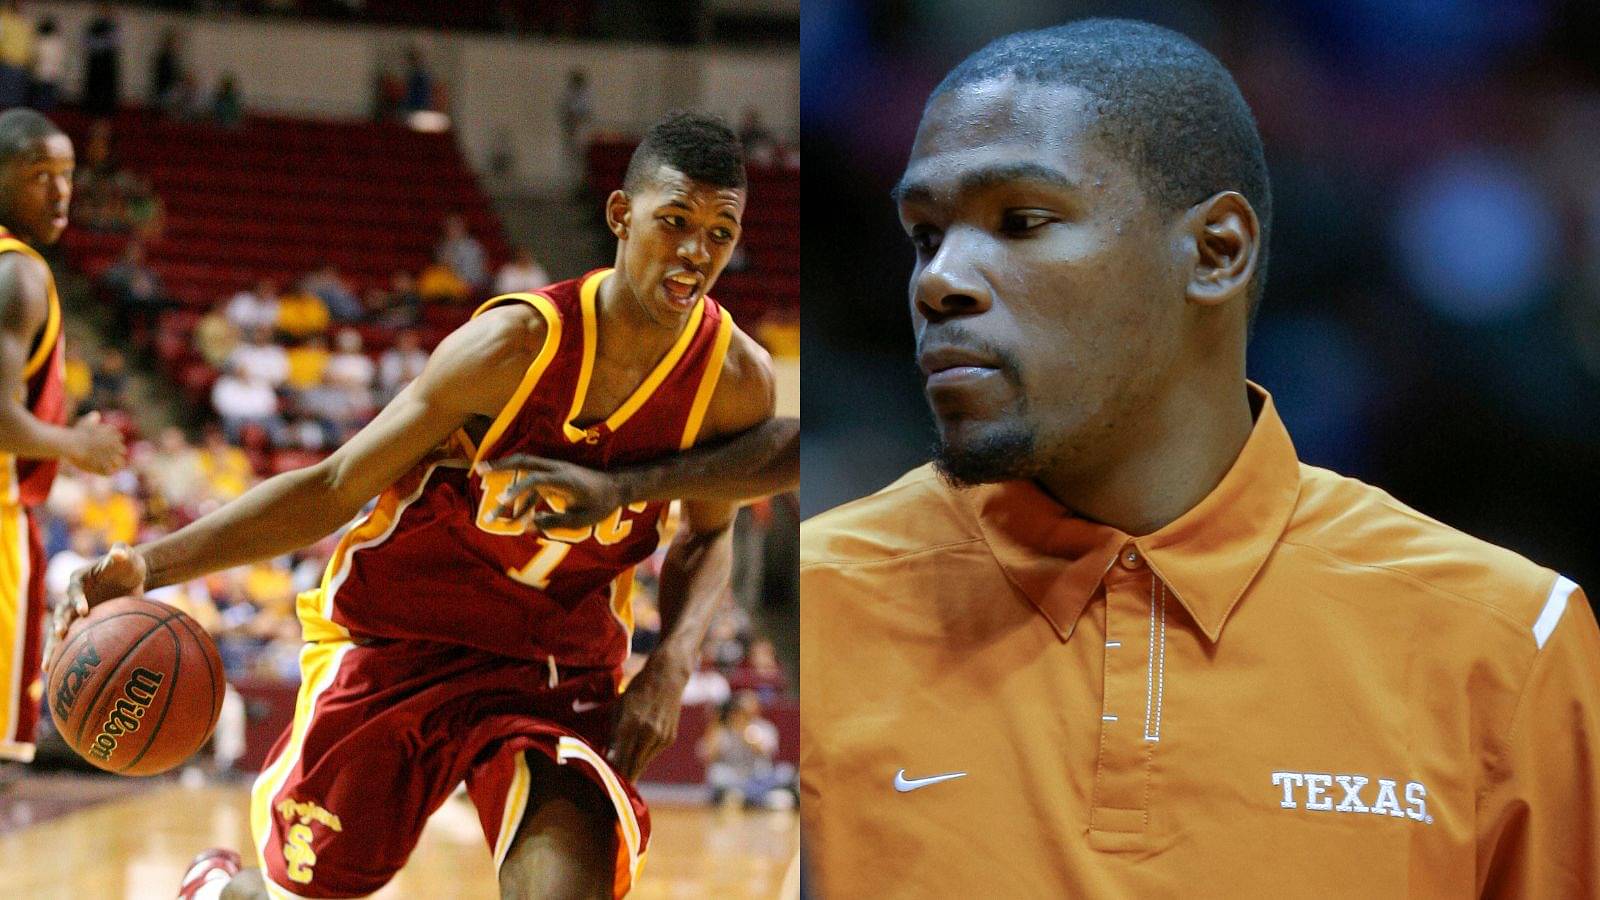 Beating Kevin Durant and His Longhorns With a 22-point Game Got USC’s Nick Young His Recognition